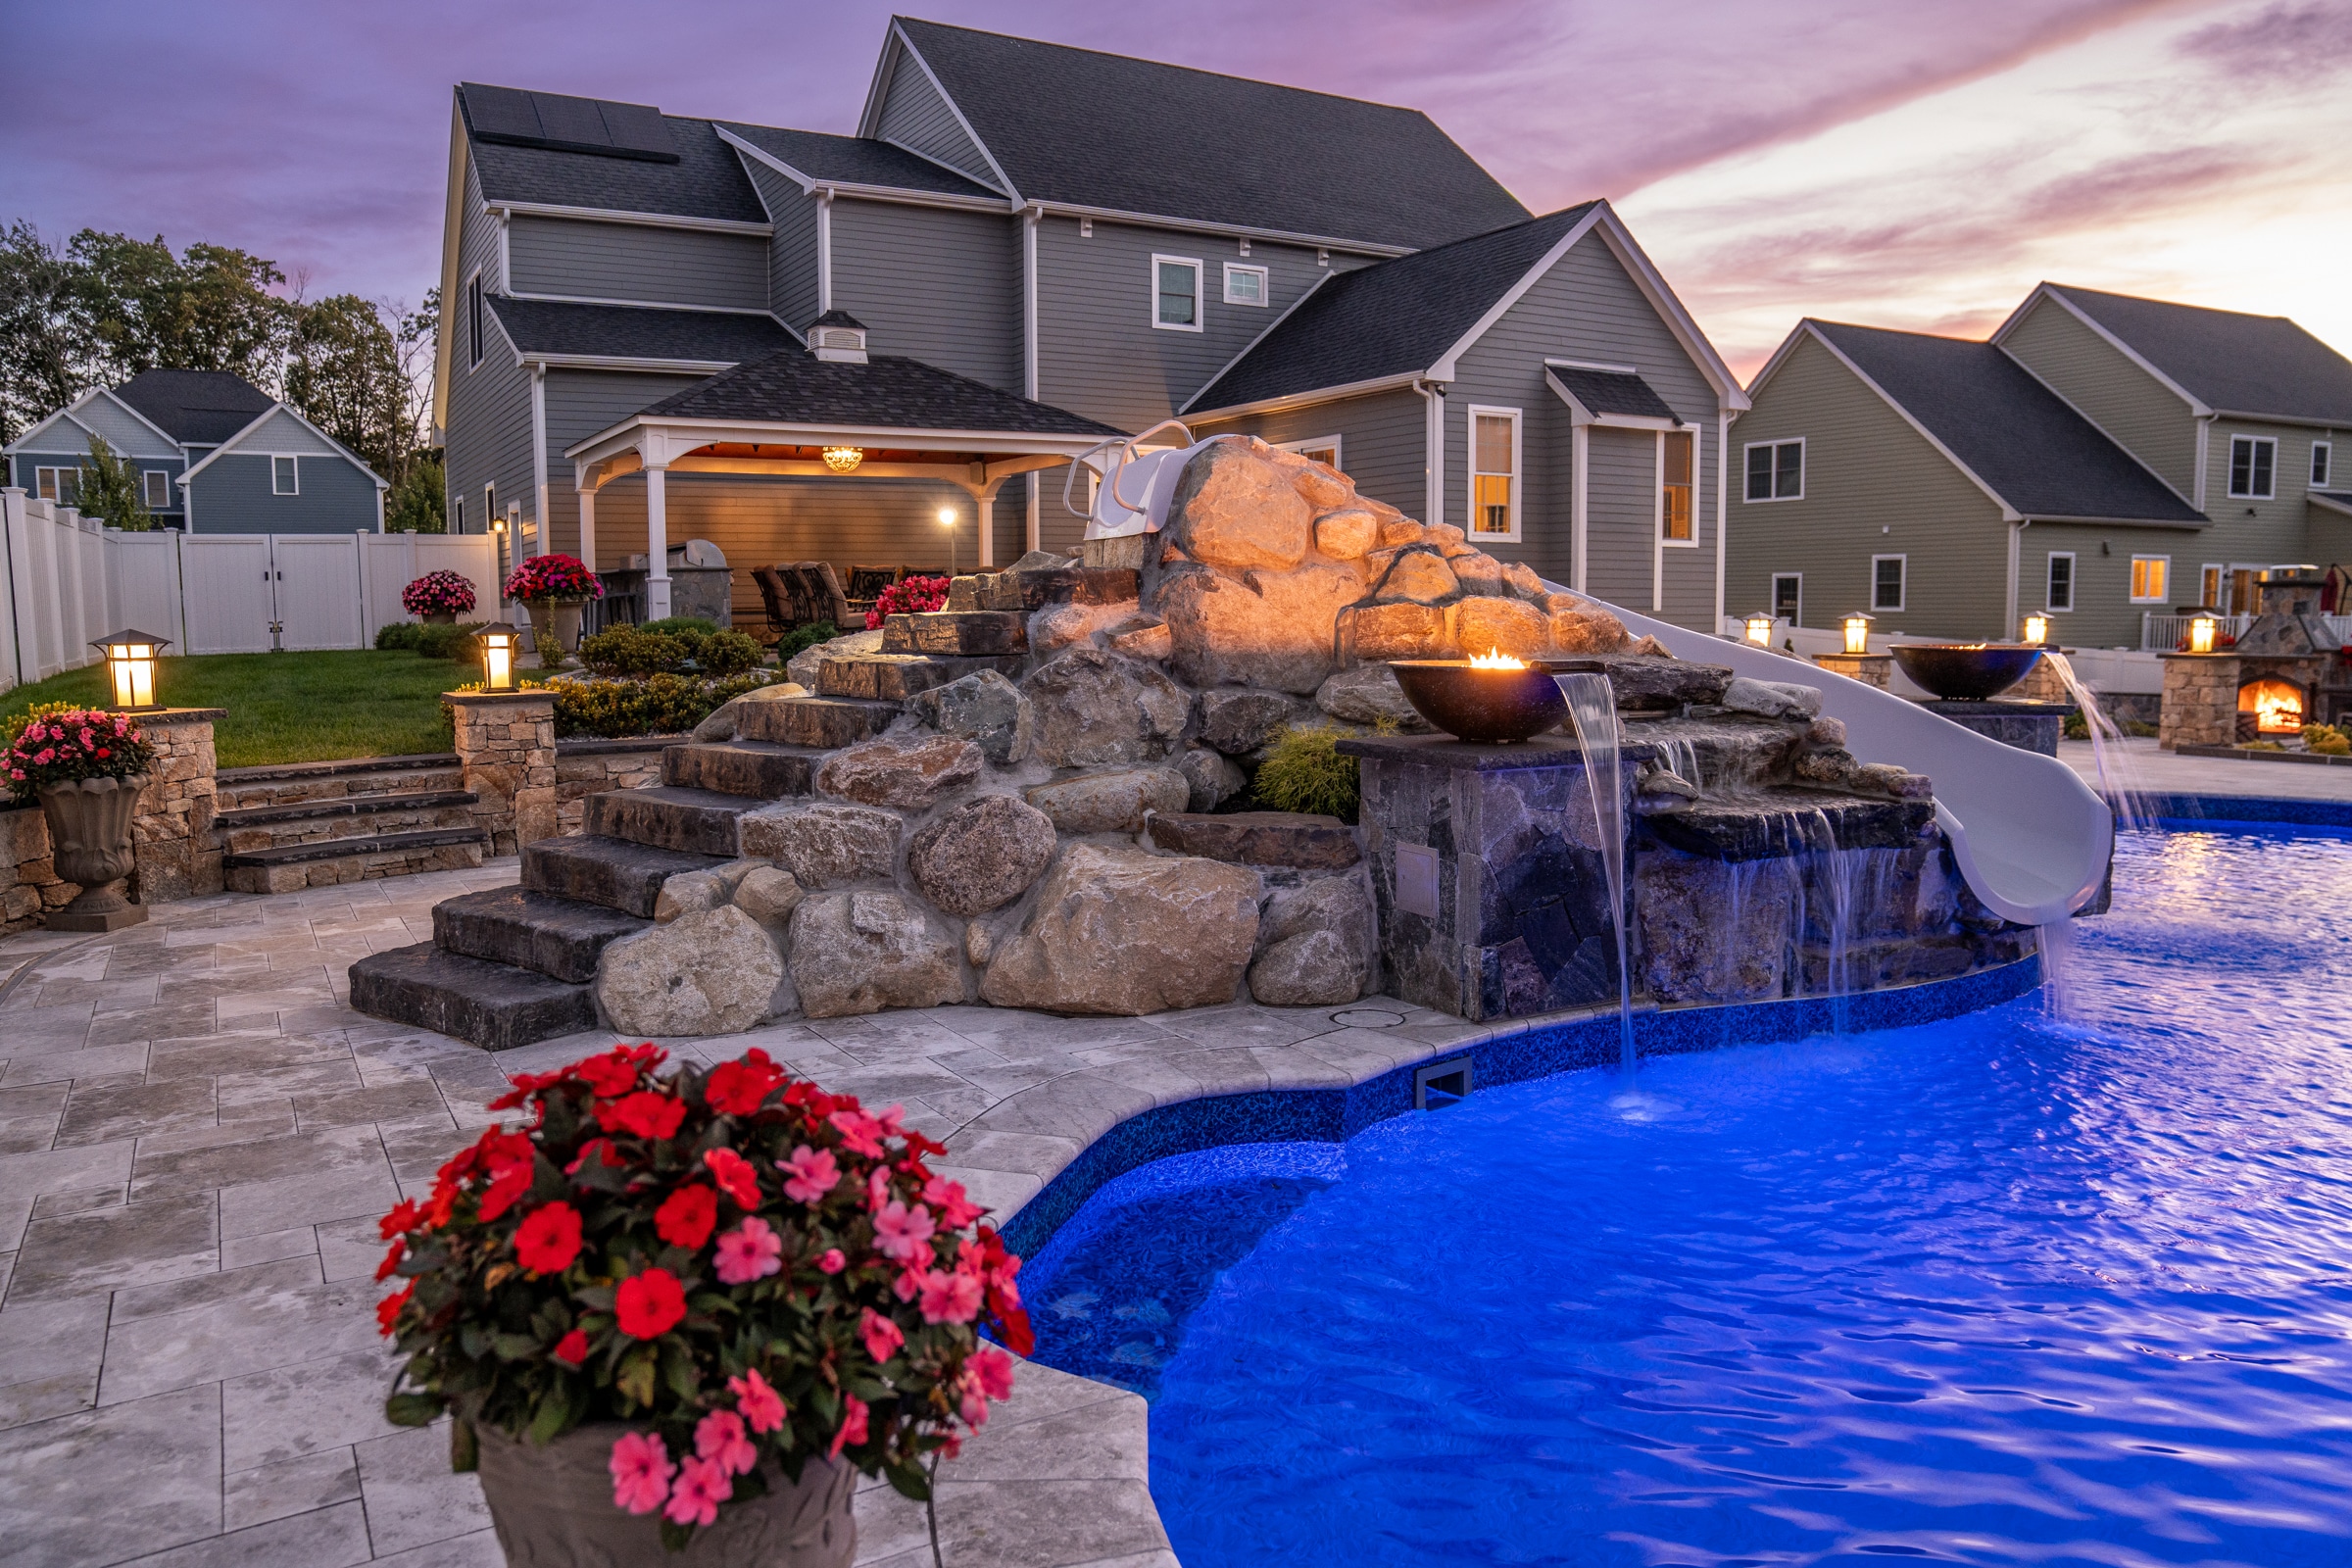 A sunset illuminates the evening sky over this pool deck and waterslide built by Dex by Terra in Grafton, Massachusetts.